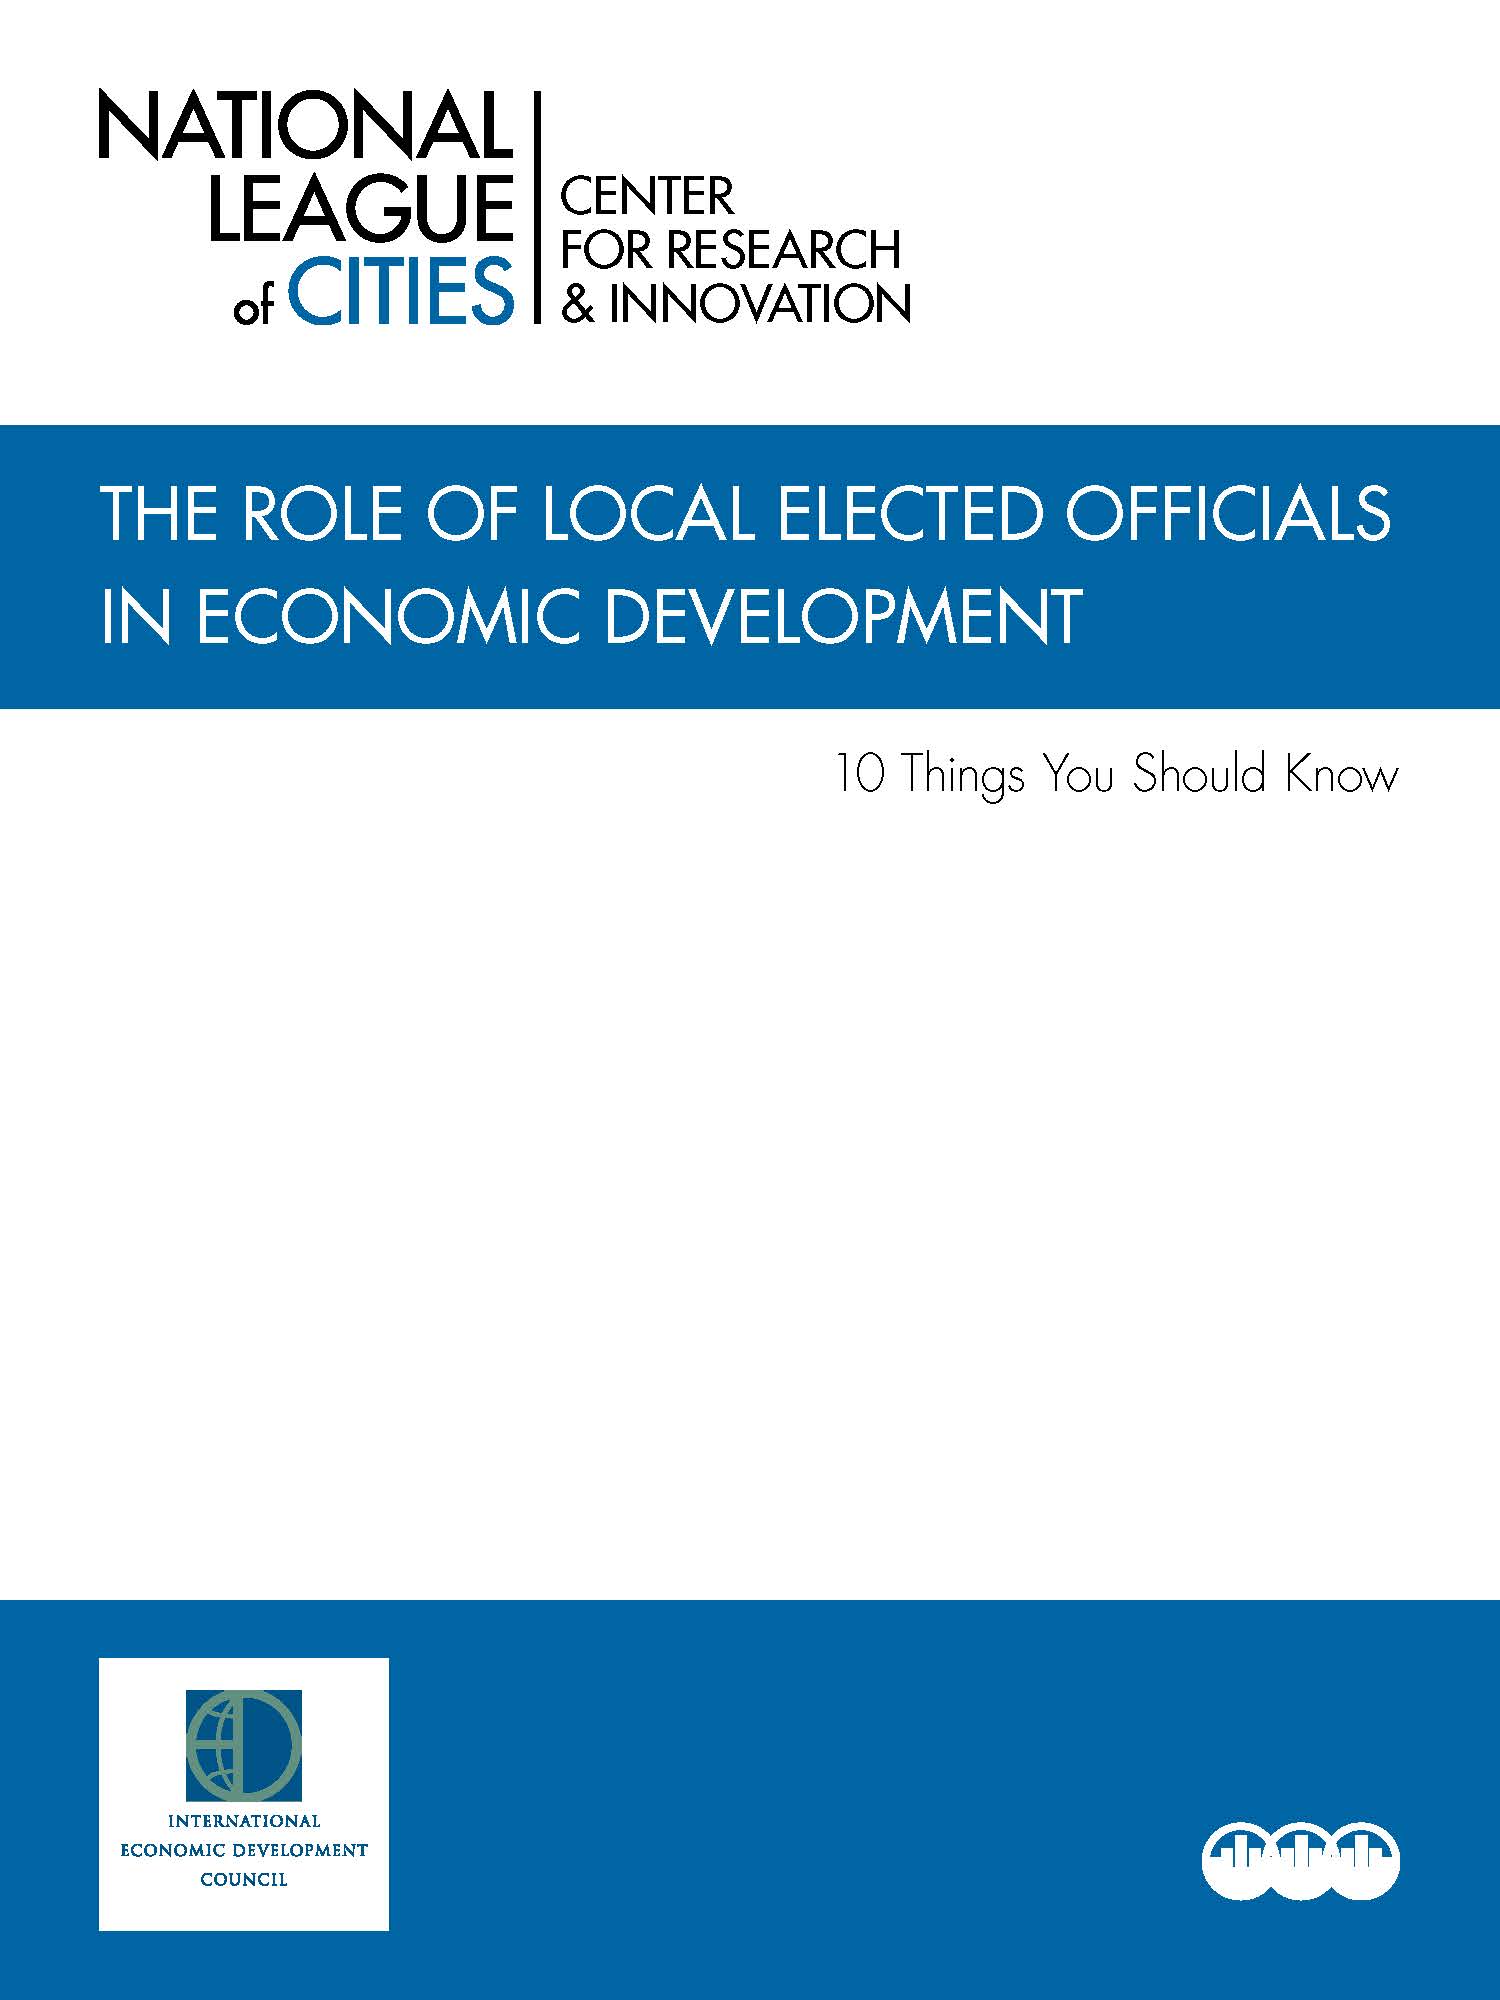 The Role of Local Elected Officials in Economic Development